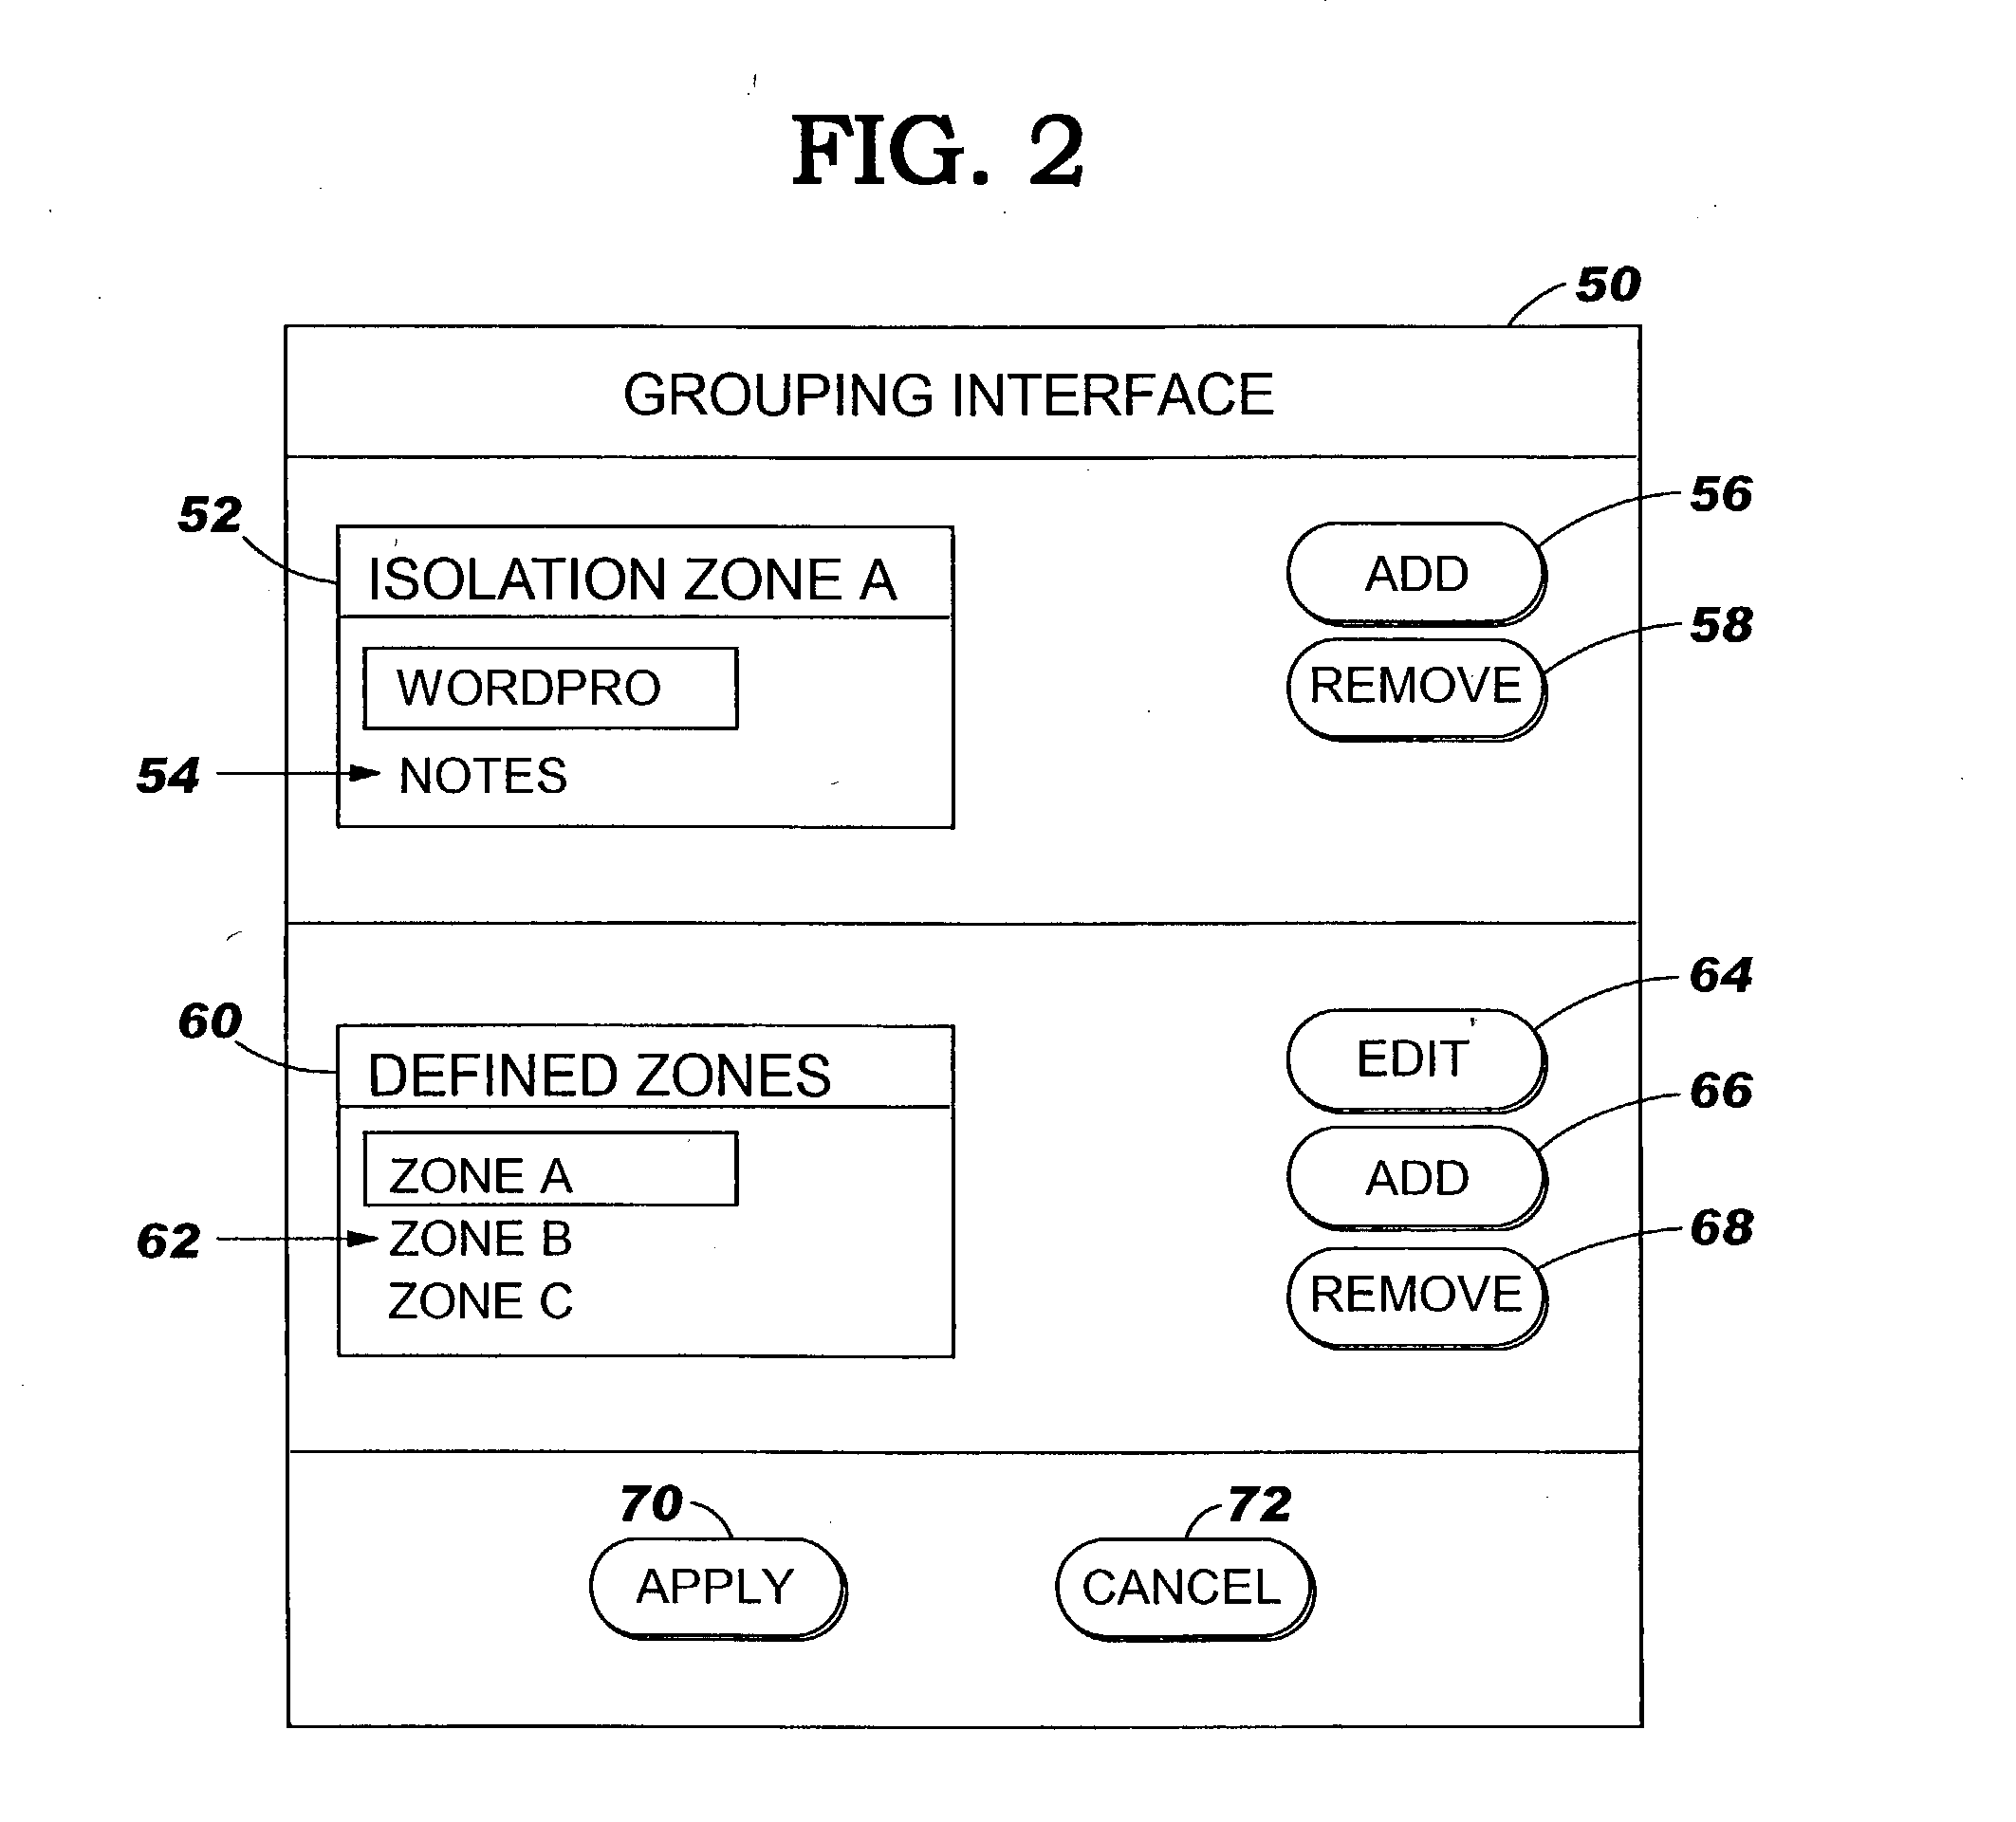 Method, system and program product for limiting insertion of content between computer programs